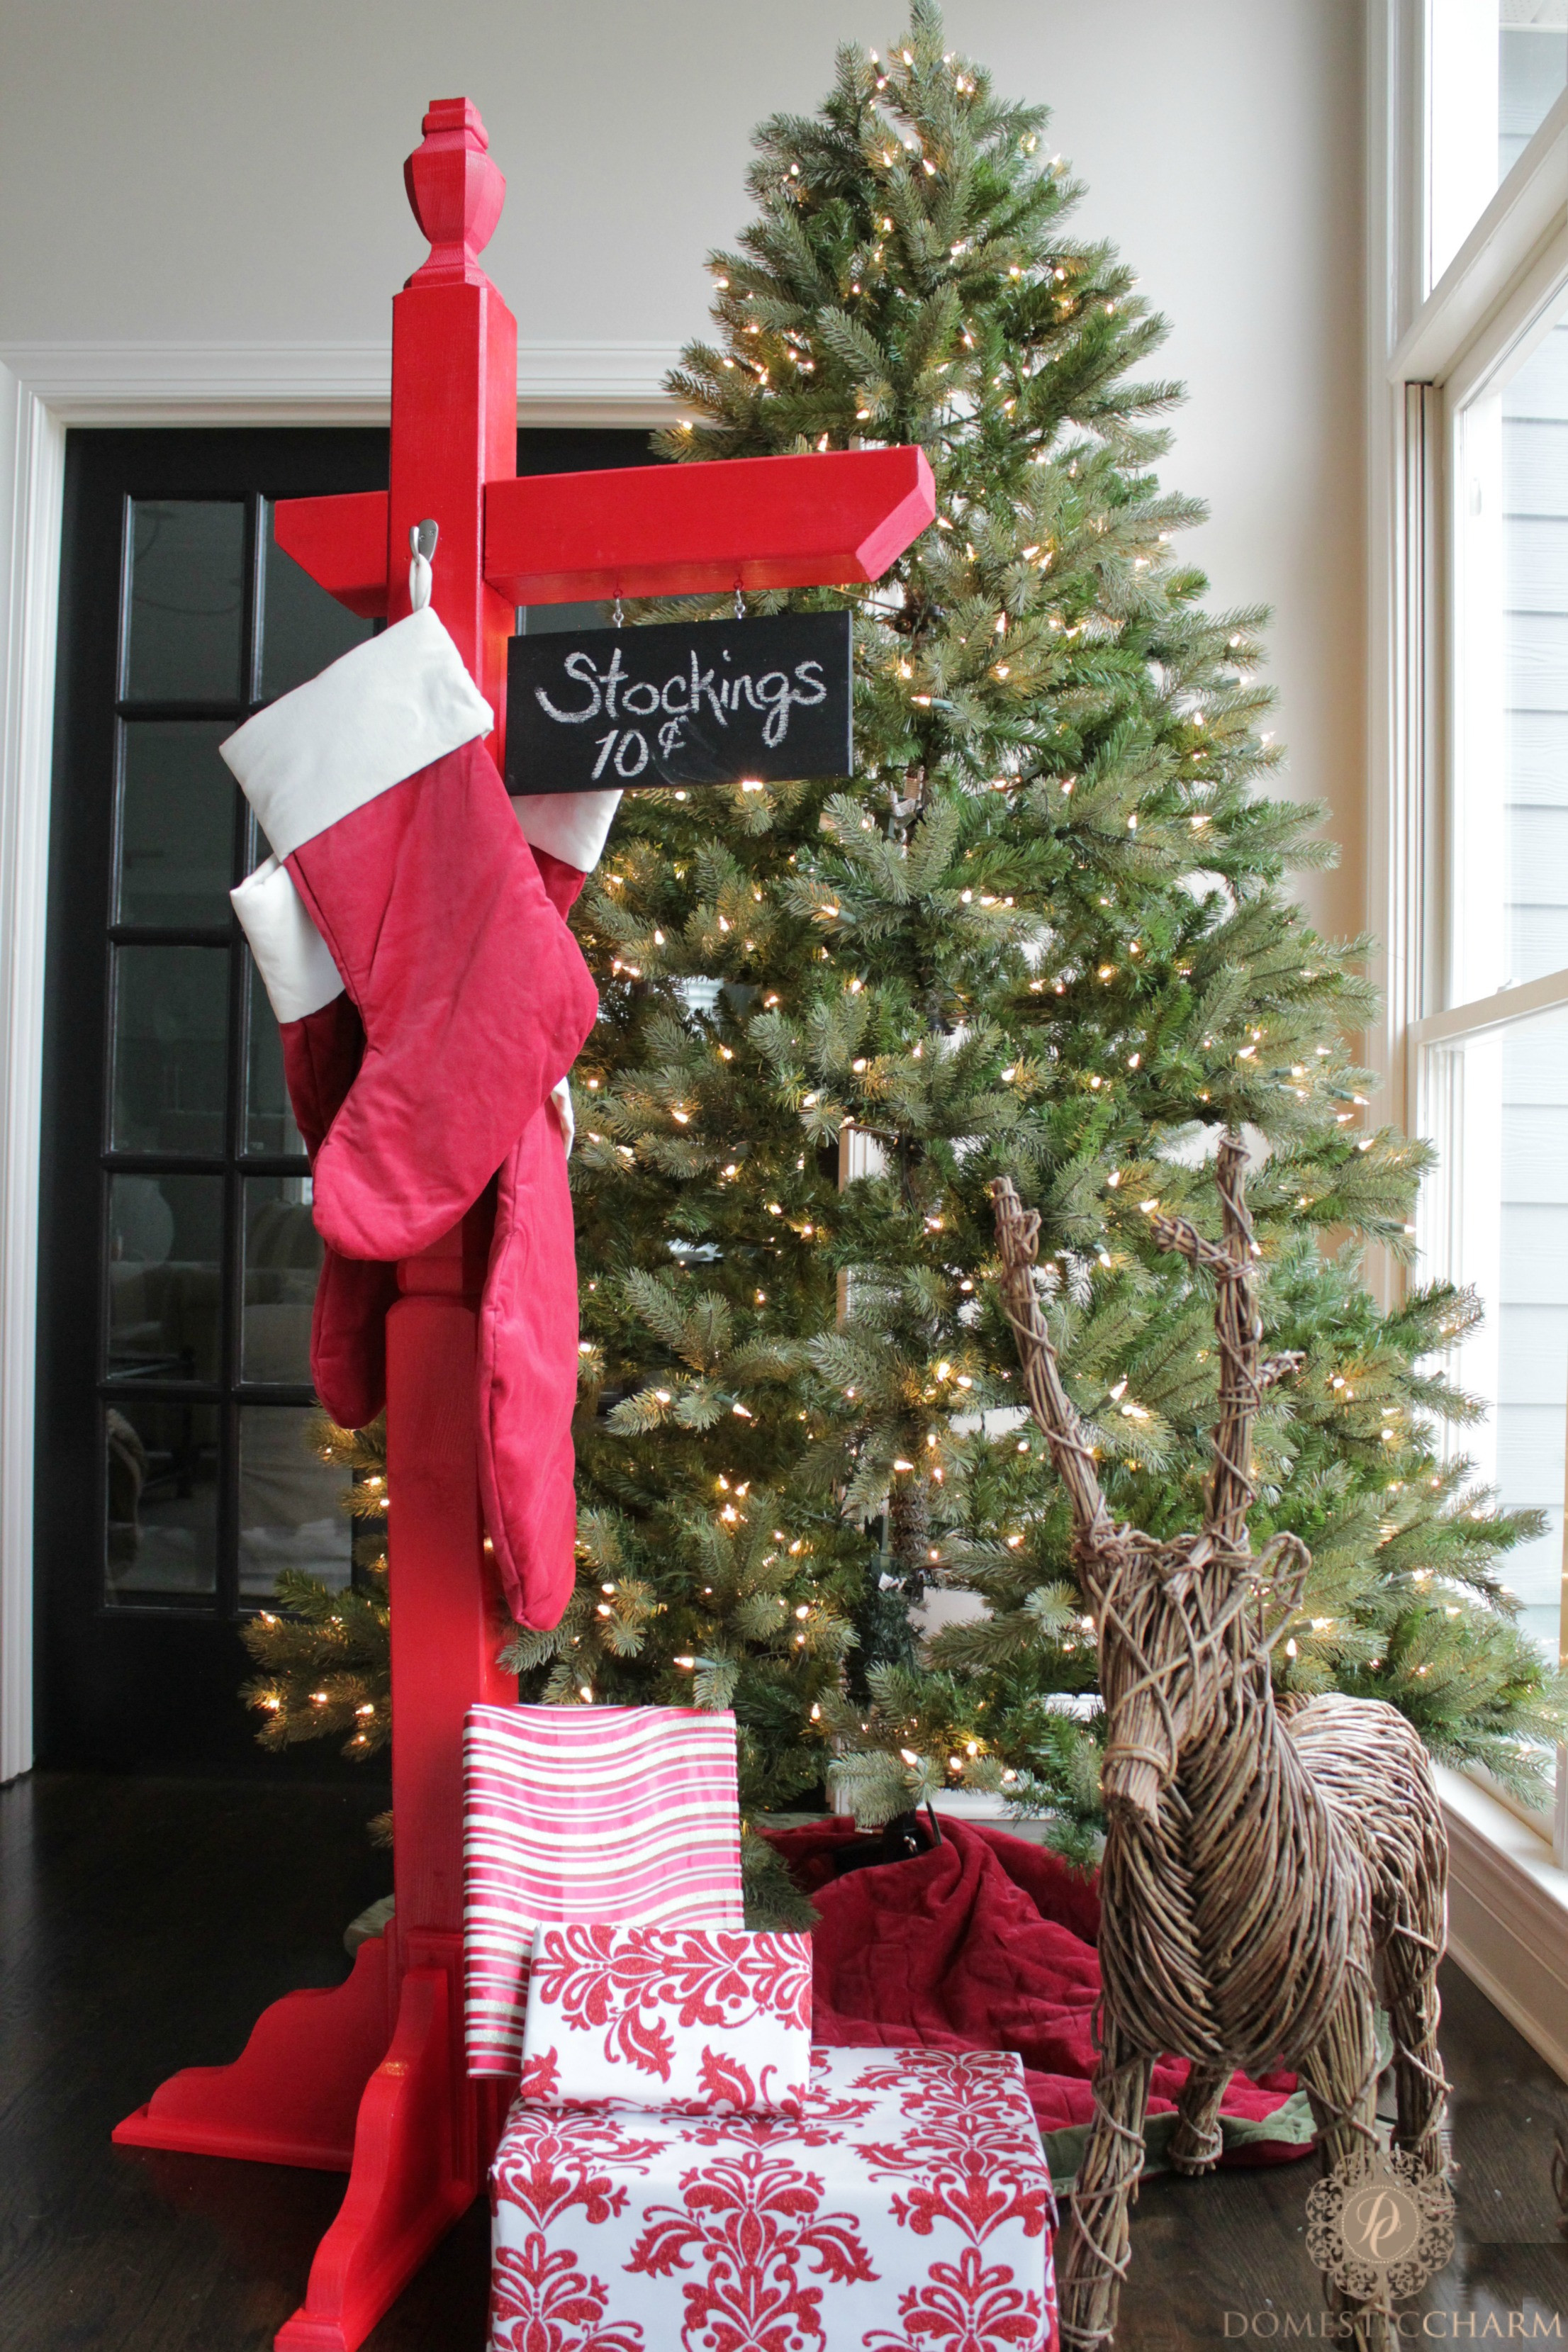 DIY Christmas Stocking Holder
 DIY Stocking Holder with The Home Depot Domestic Charm